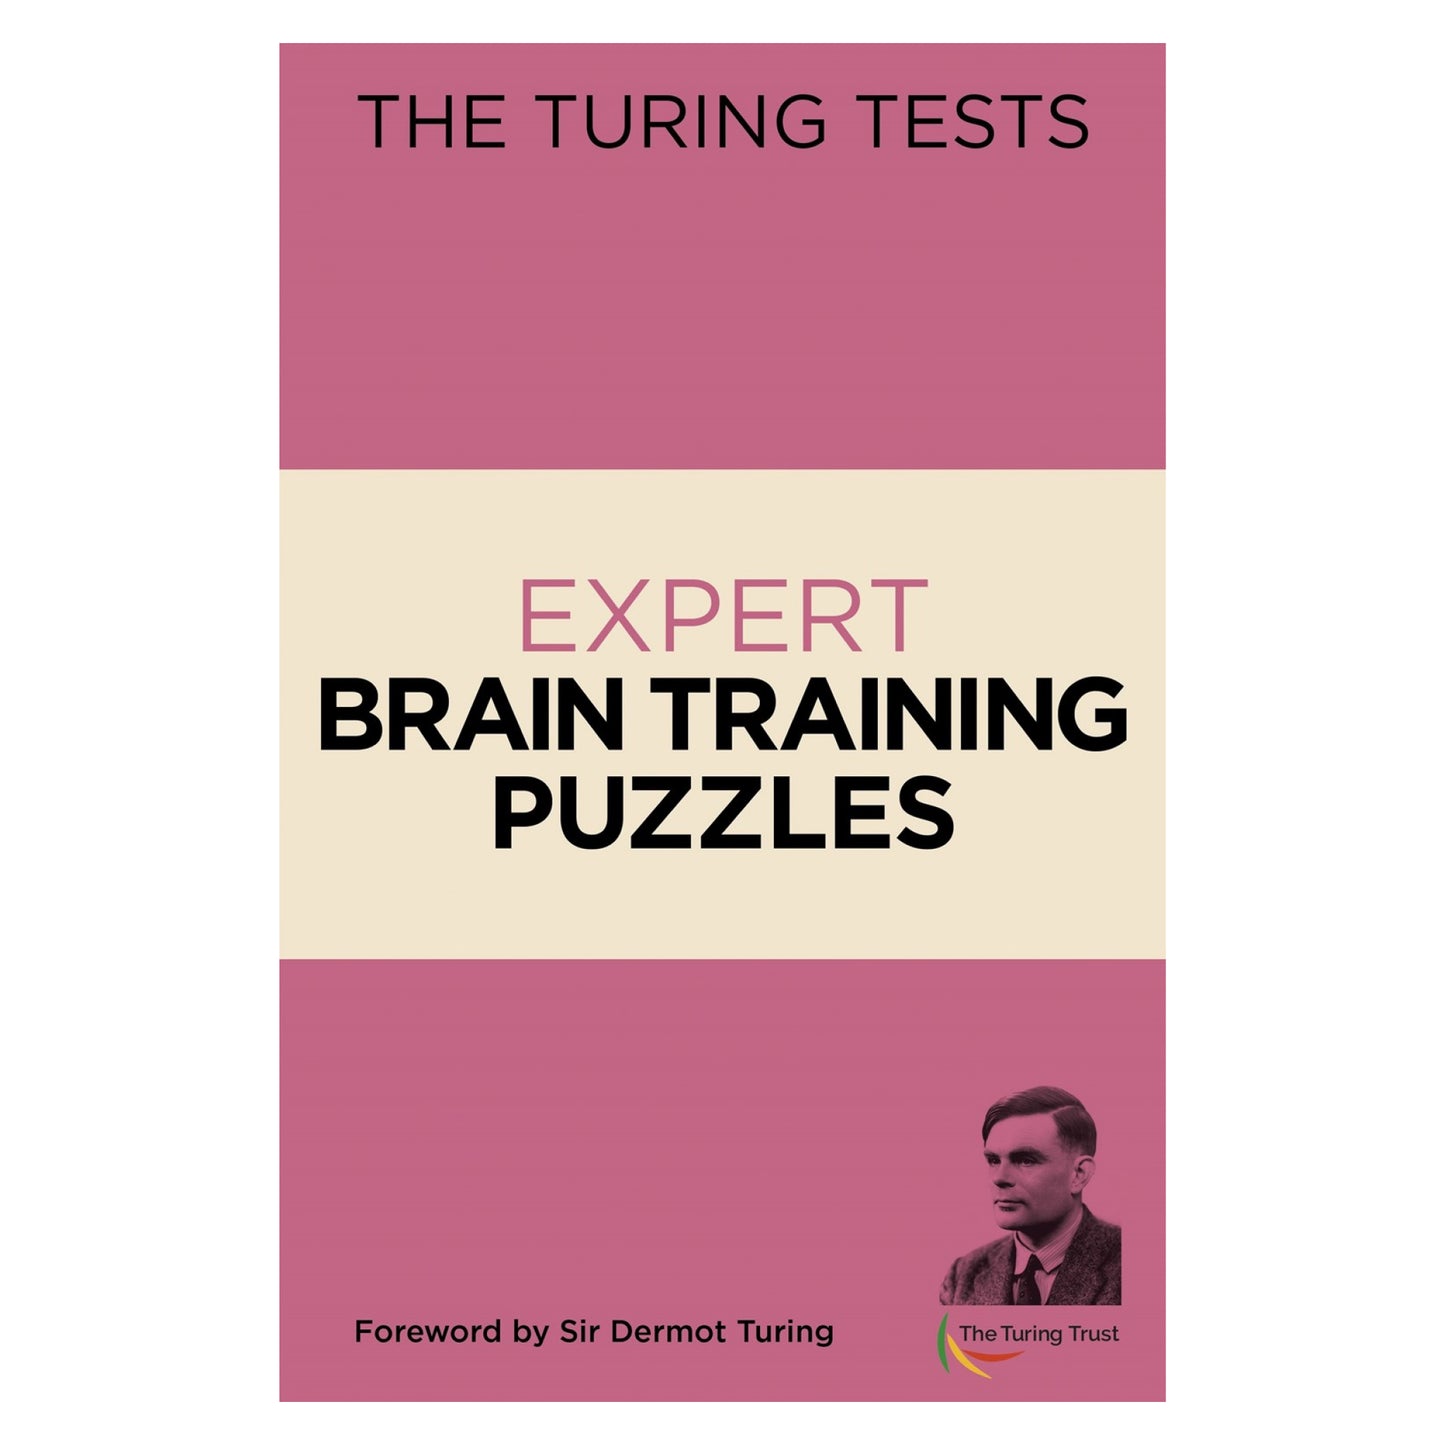 The Turing Tests: Expert Brain Training